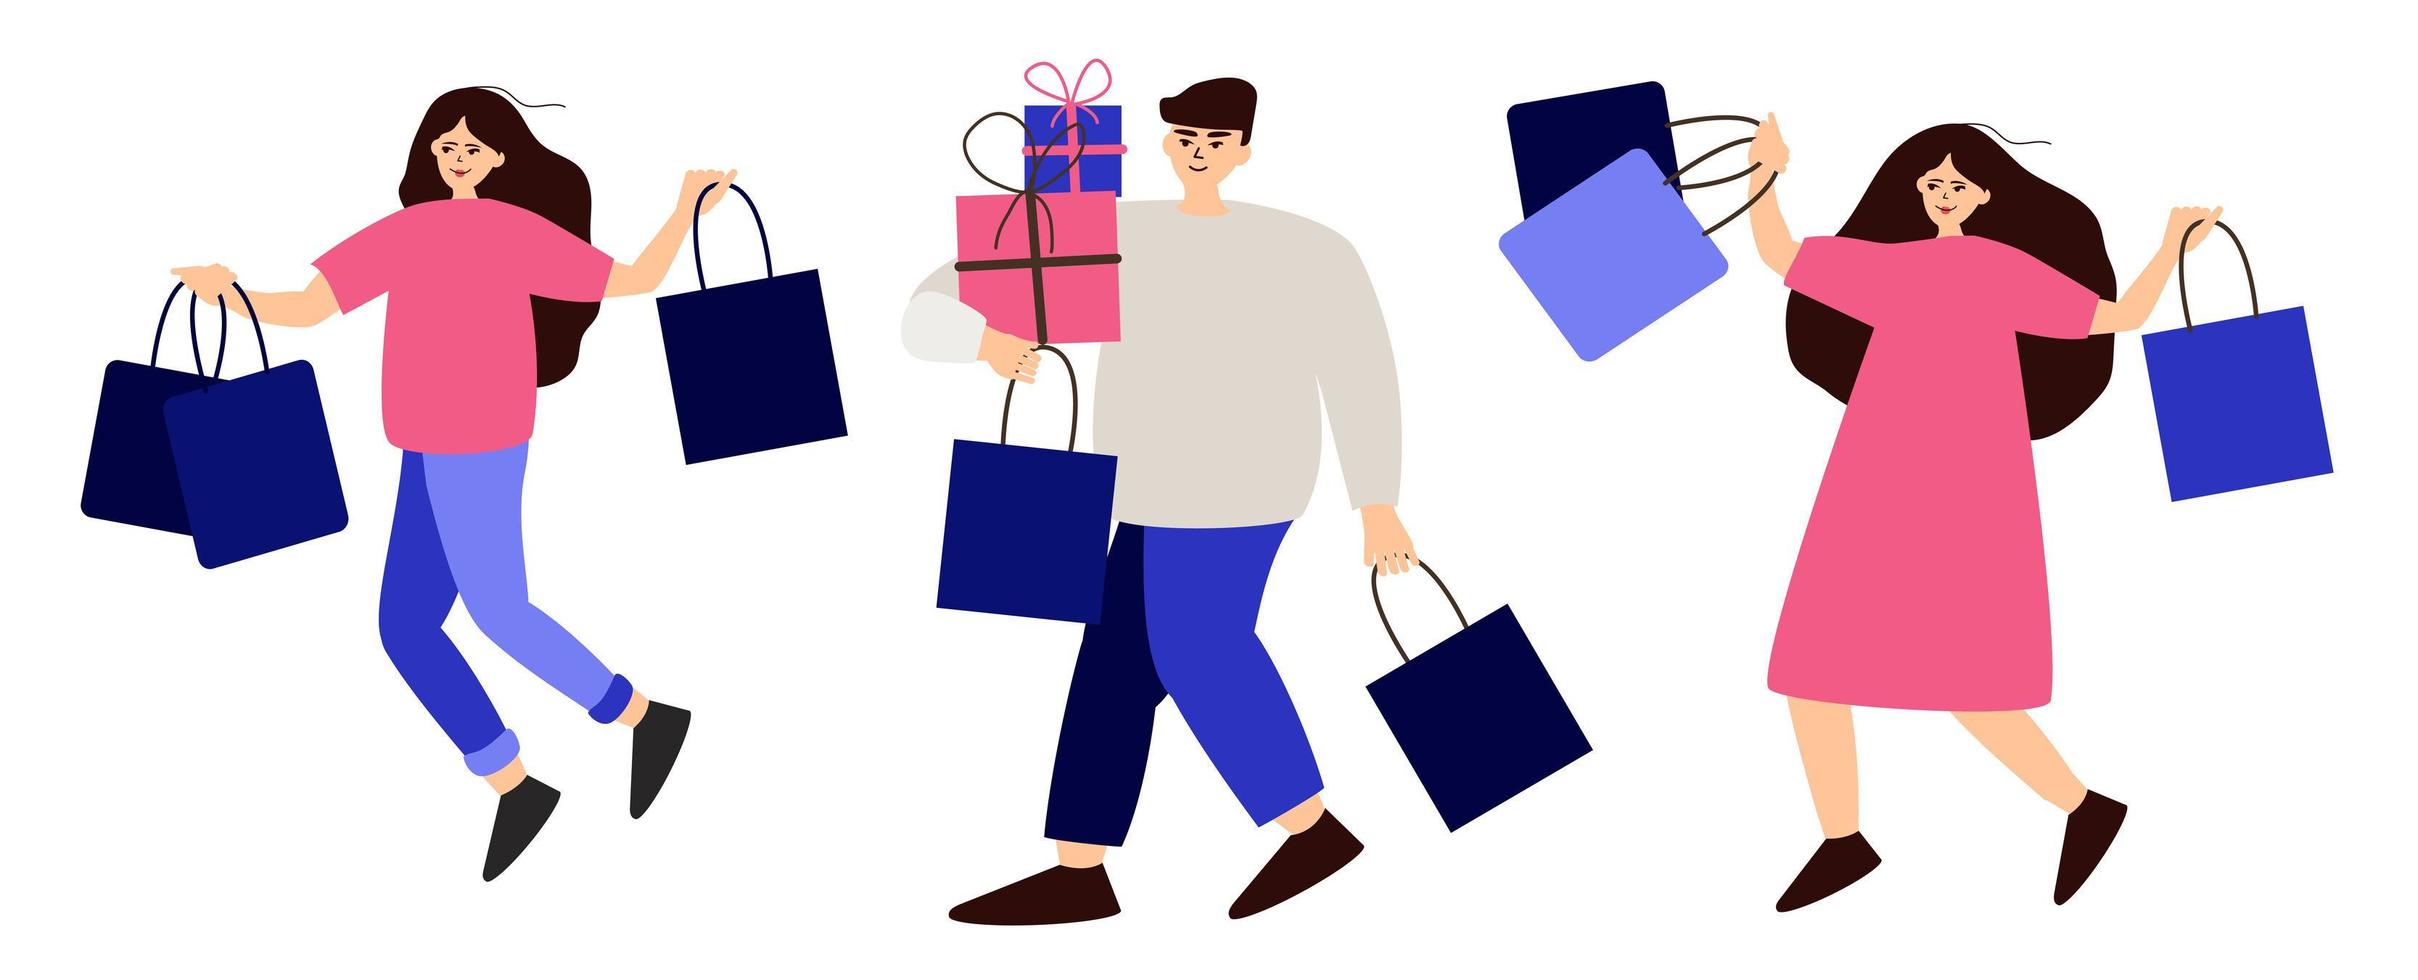 Collection of people carrying shopping bags with purchases. Men and women taking part in seasonal sale at store, shop, mall. Cartoon characters isolated on white background. Flat vector illustration